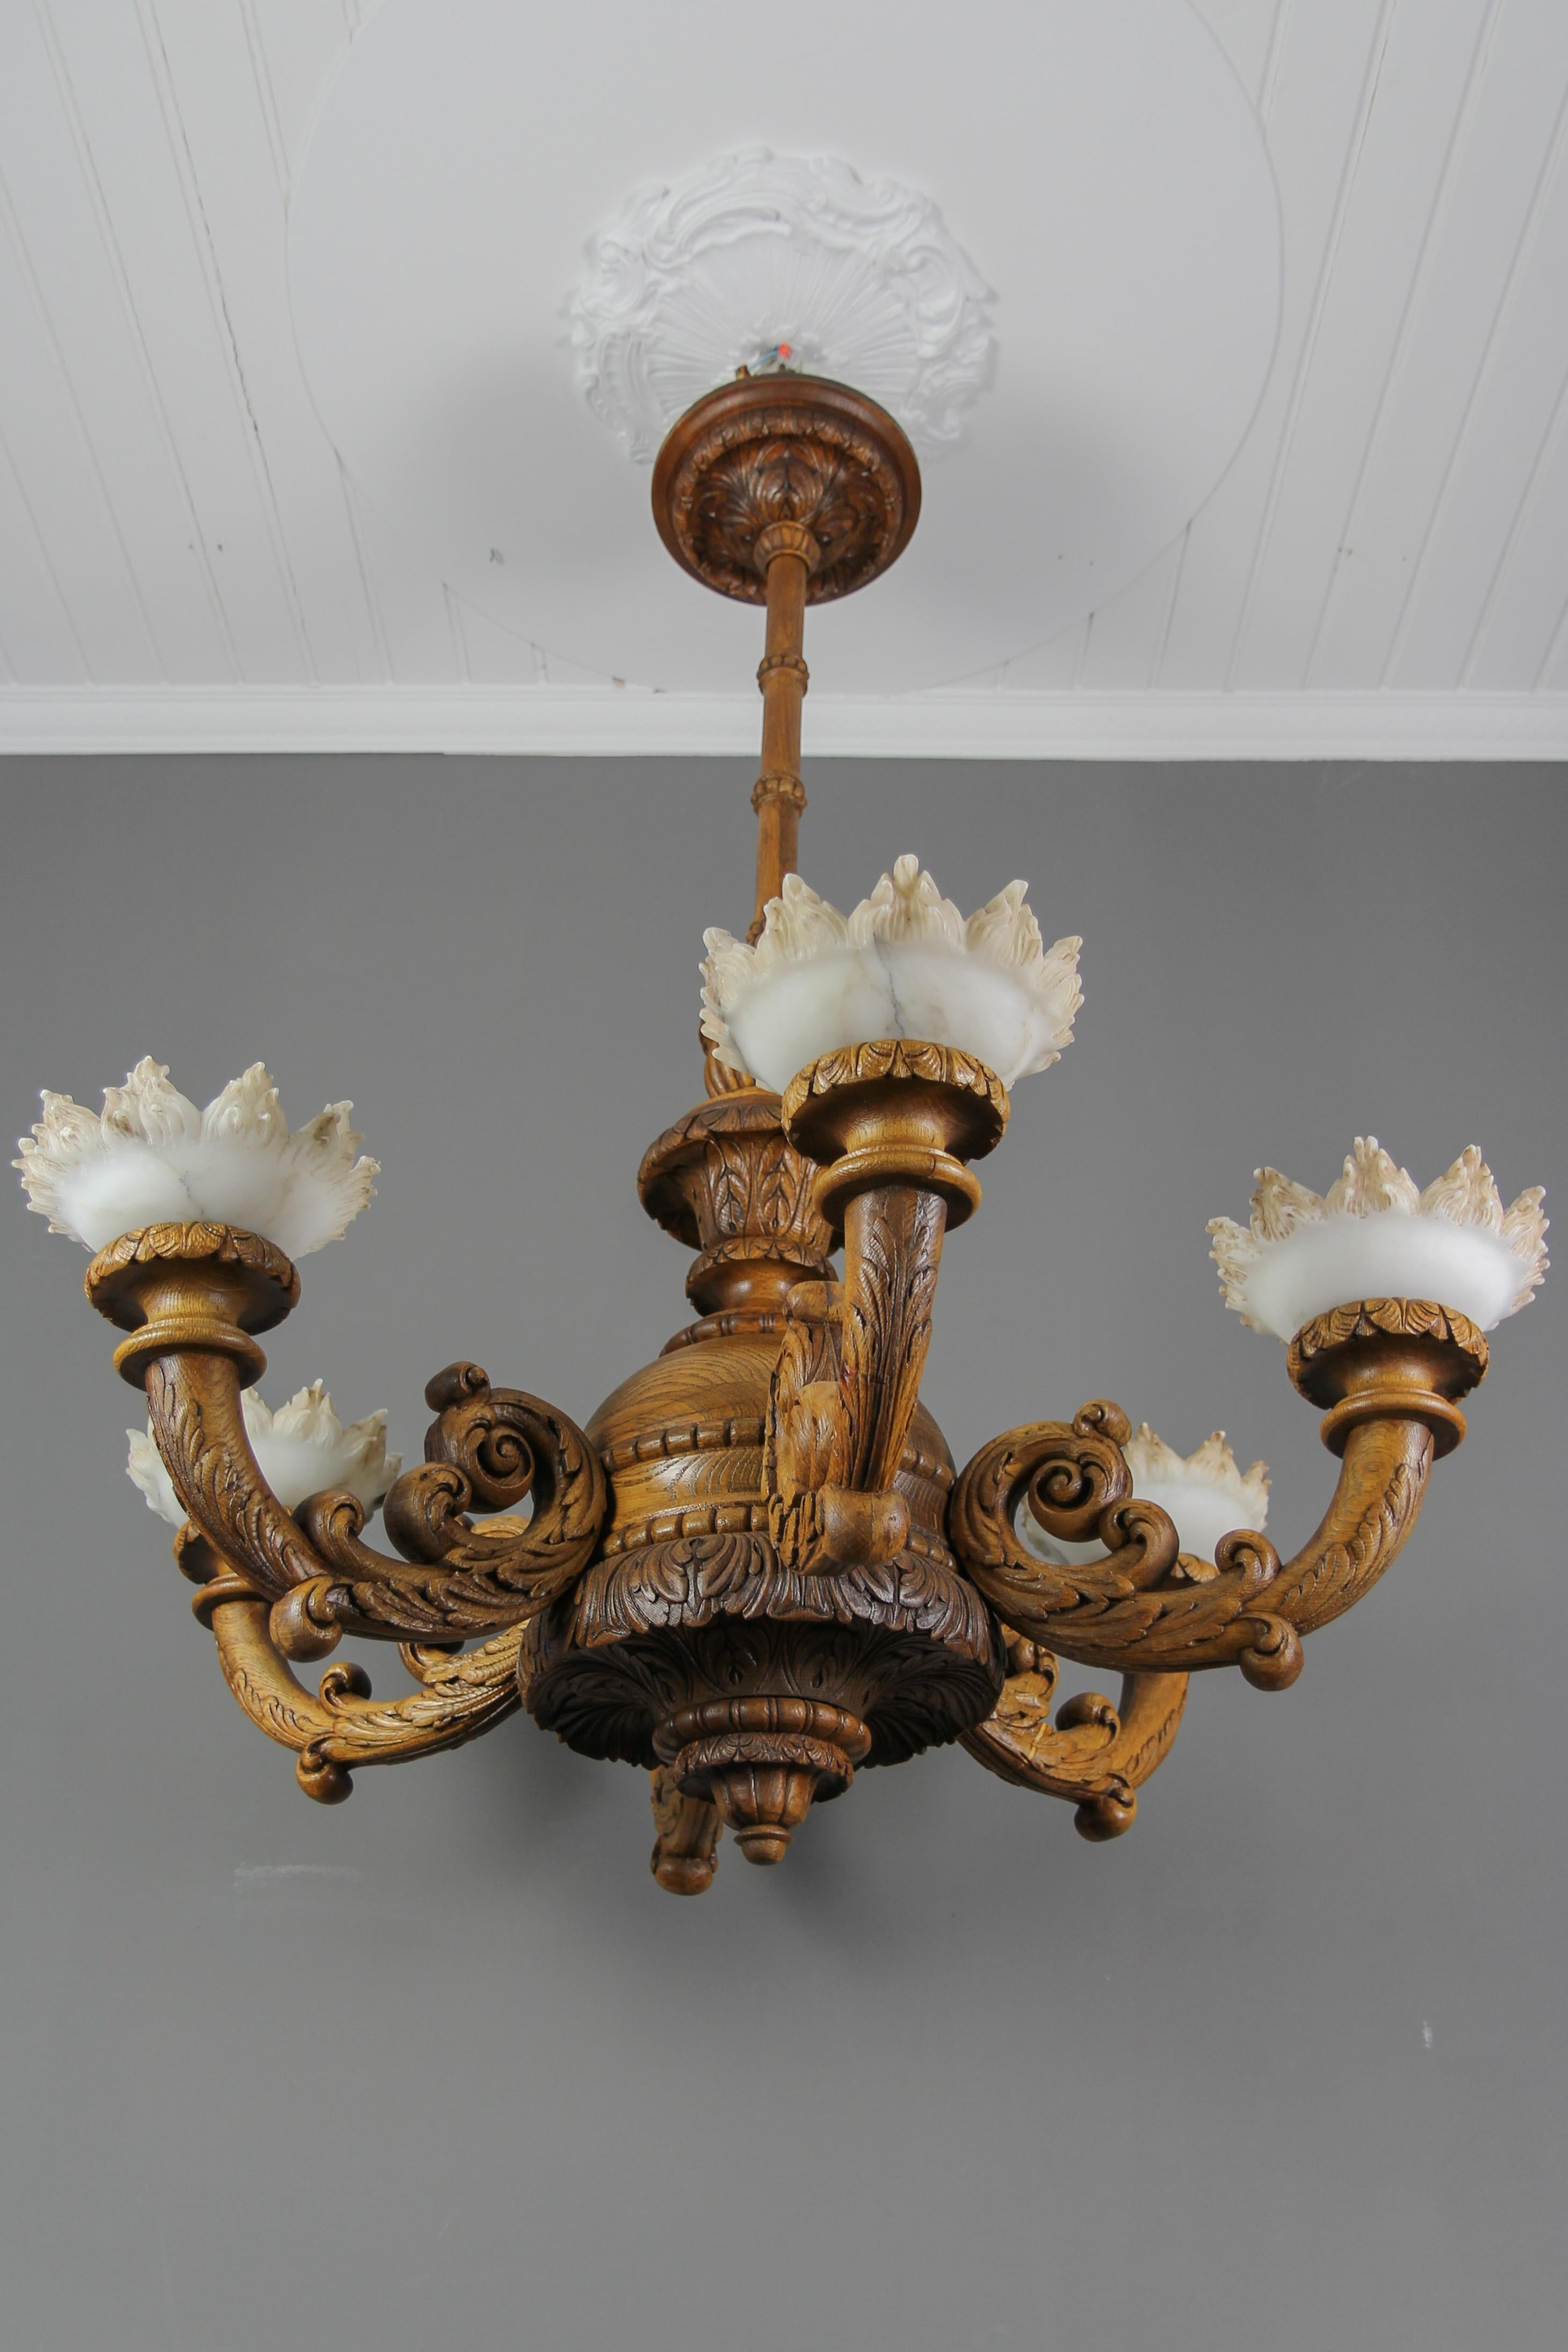 Large Neoclassical Style Carved Oakwood and Alabaster Chandelier, Germany, circa the 1920s.
This impressive Neoclassical style chandelier in oak is finely hand-crafted, made in the first third of the 20th Century.  
Impeccable details of carved